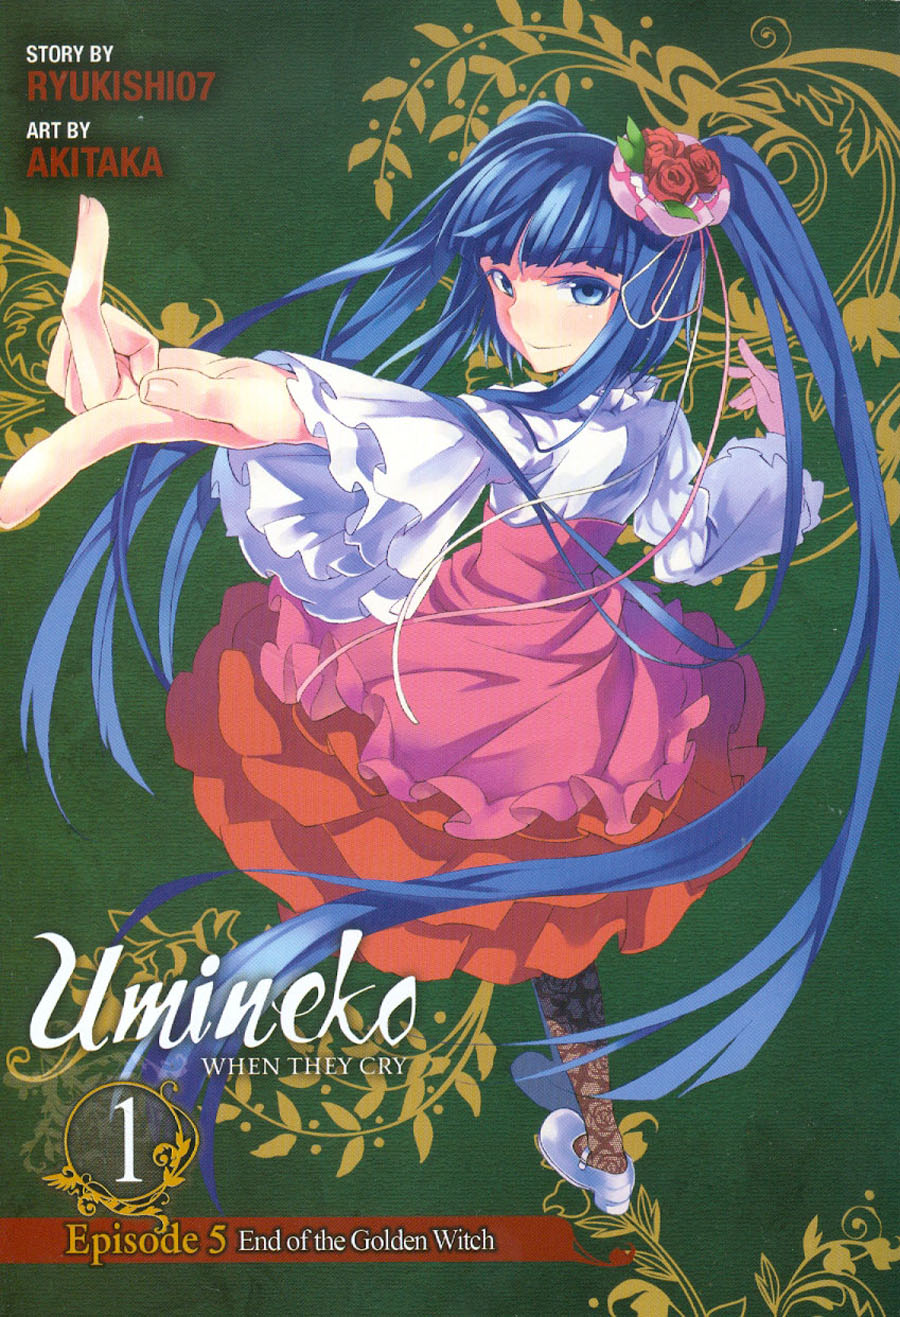 Umineko When They Cry Vol 10 Episode 5 End Of The Golden Witch Part 1 GN